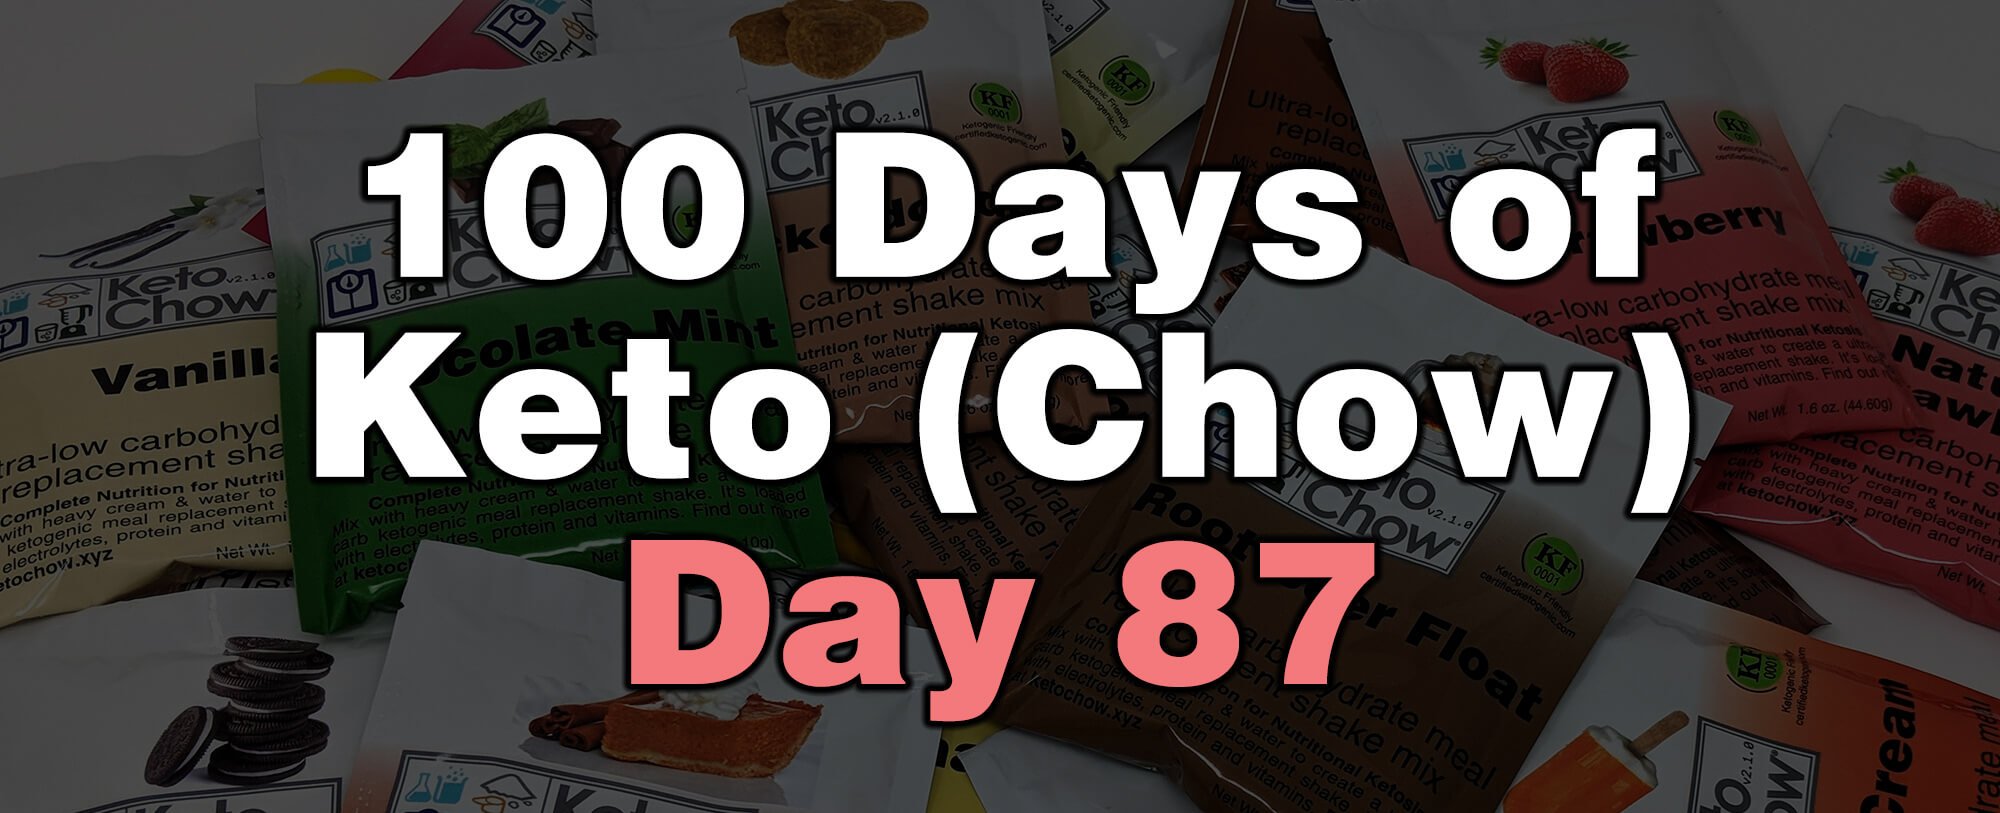 100 days of keto chow day 87